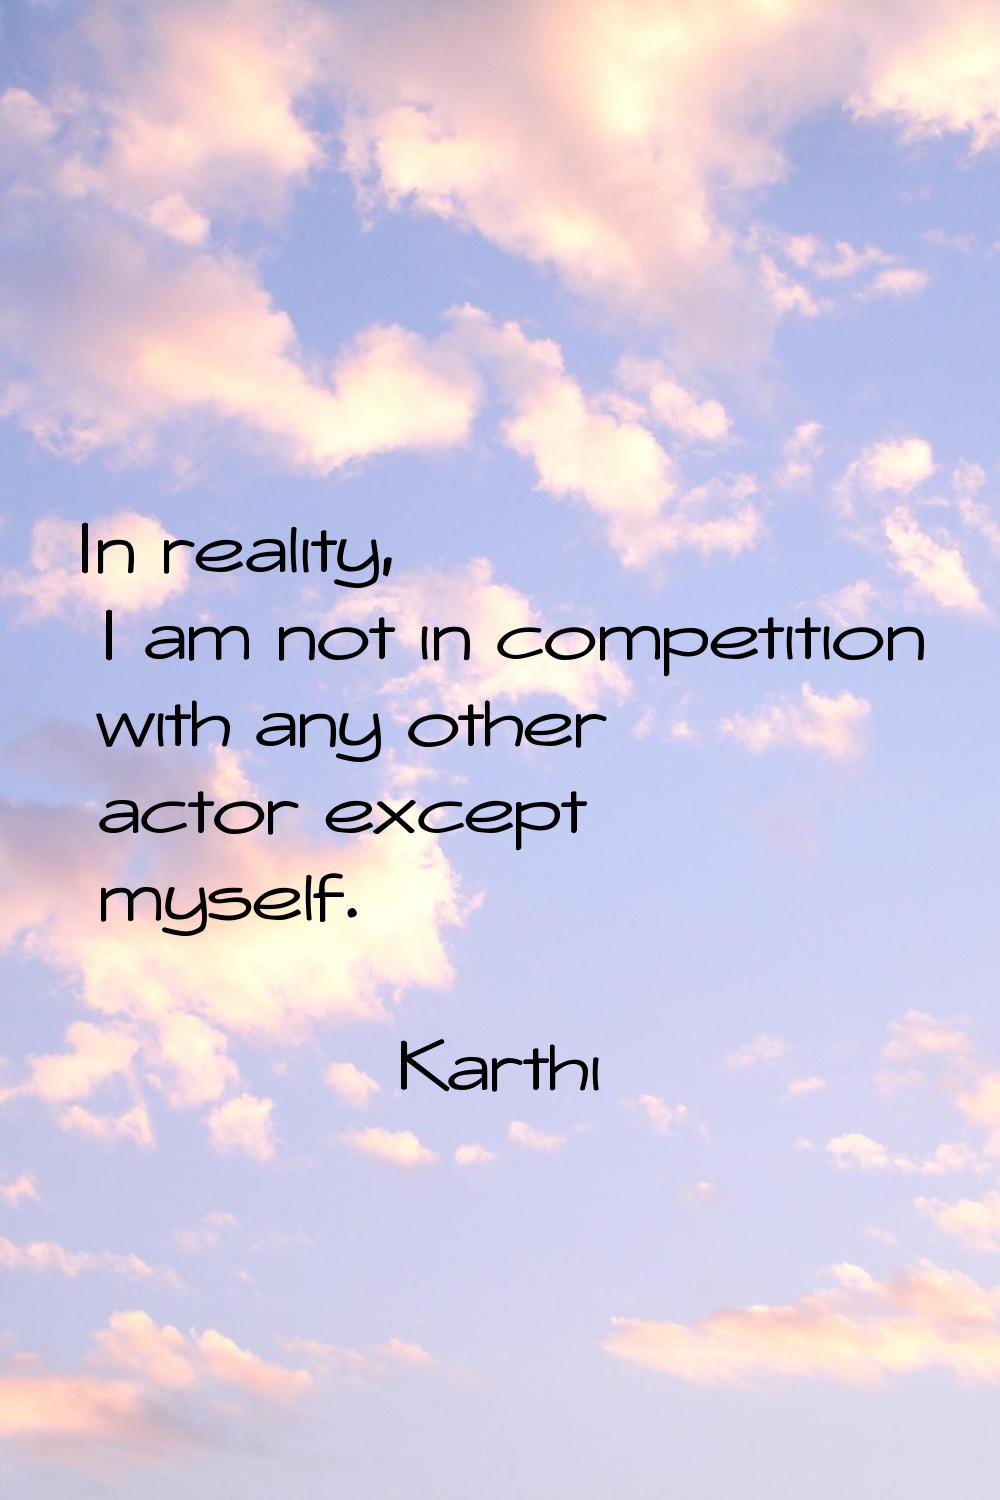 In reality, I am not in competition with any other actor except myself.